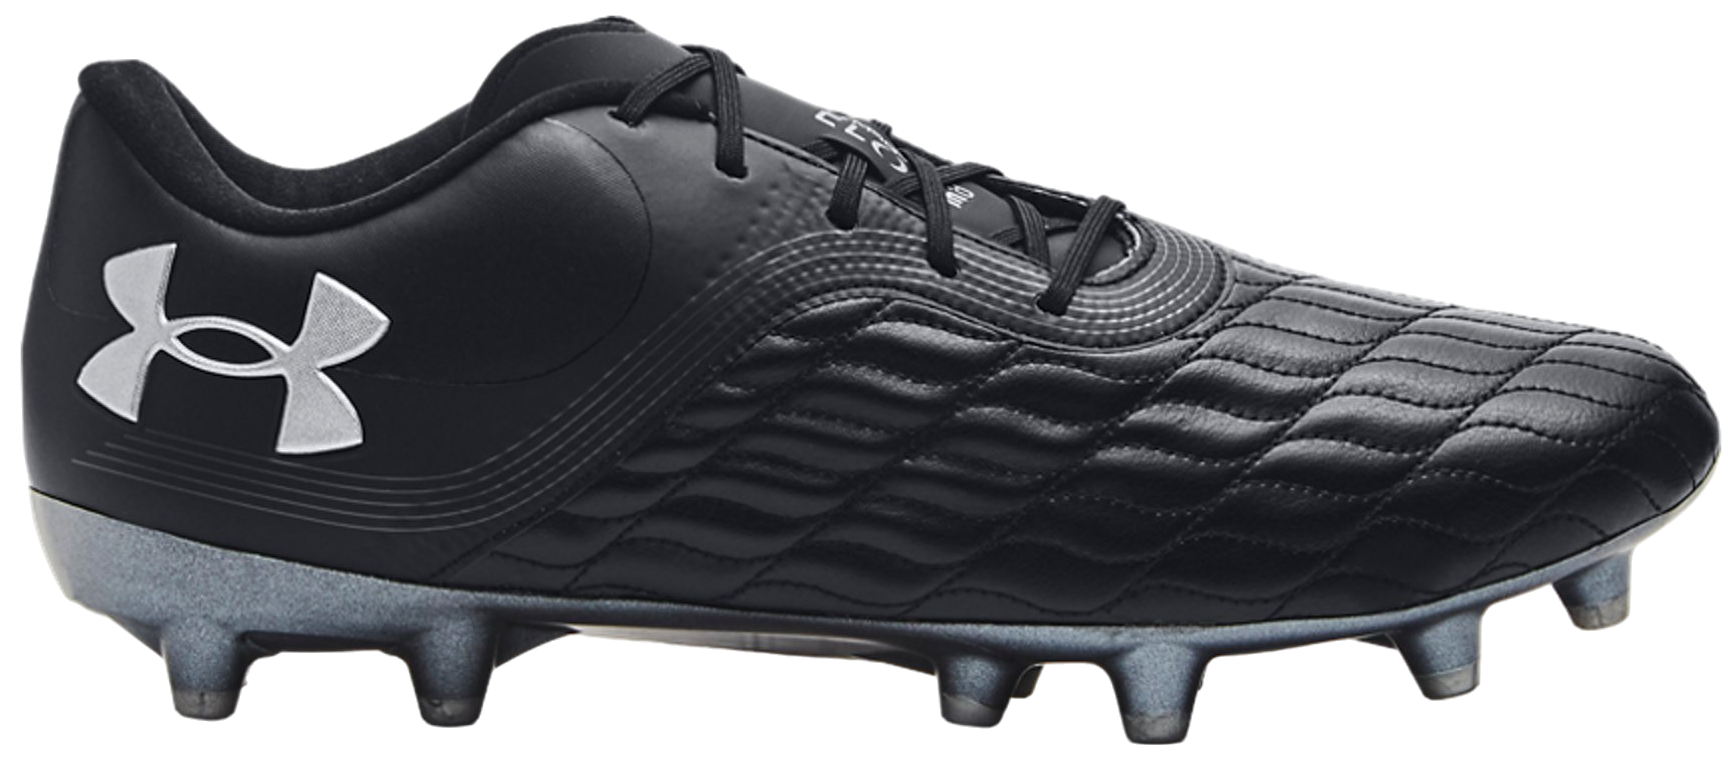 Football shoes Under Armour Clone Magnetico Pro 3.0 FG